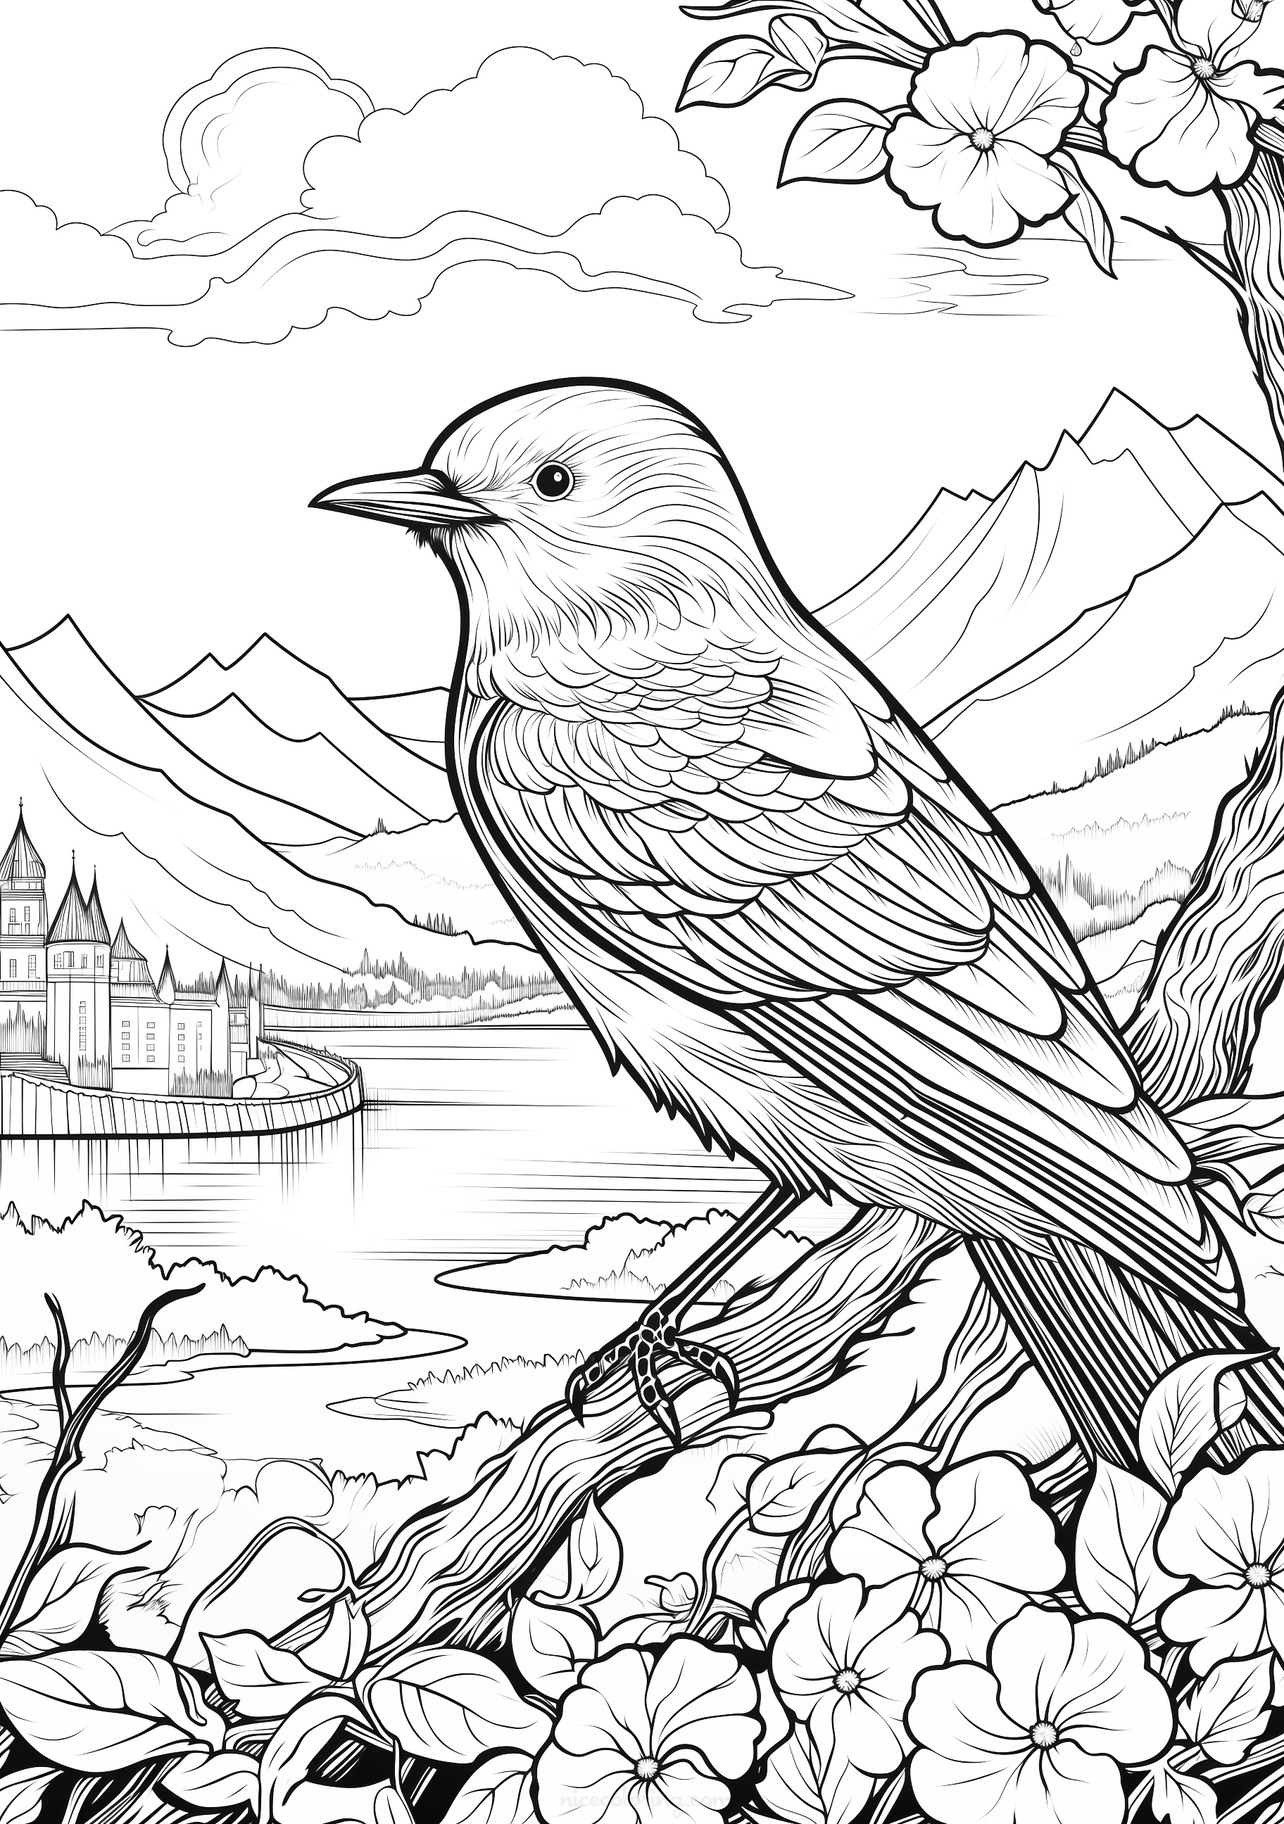 A detailed bird on a branch with scenic backdrop coloring page